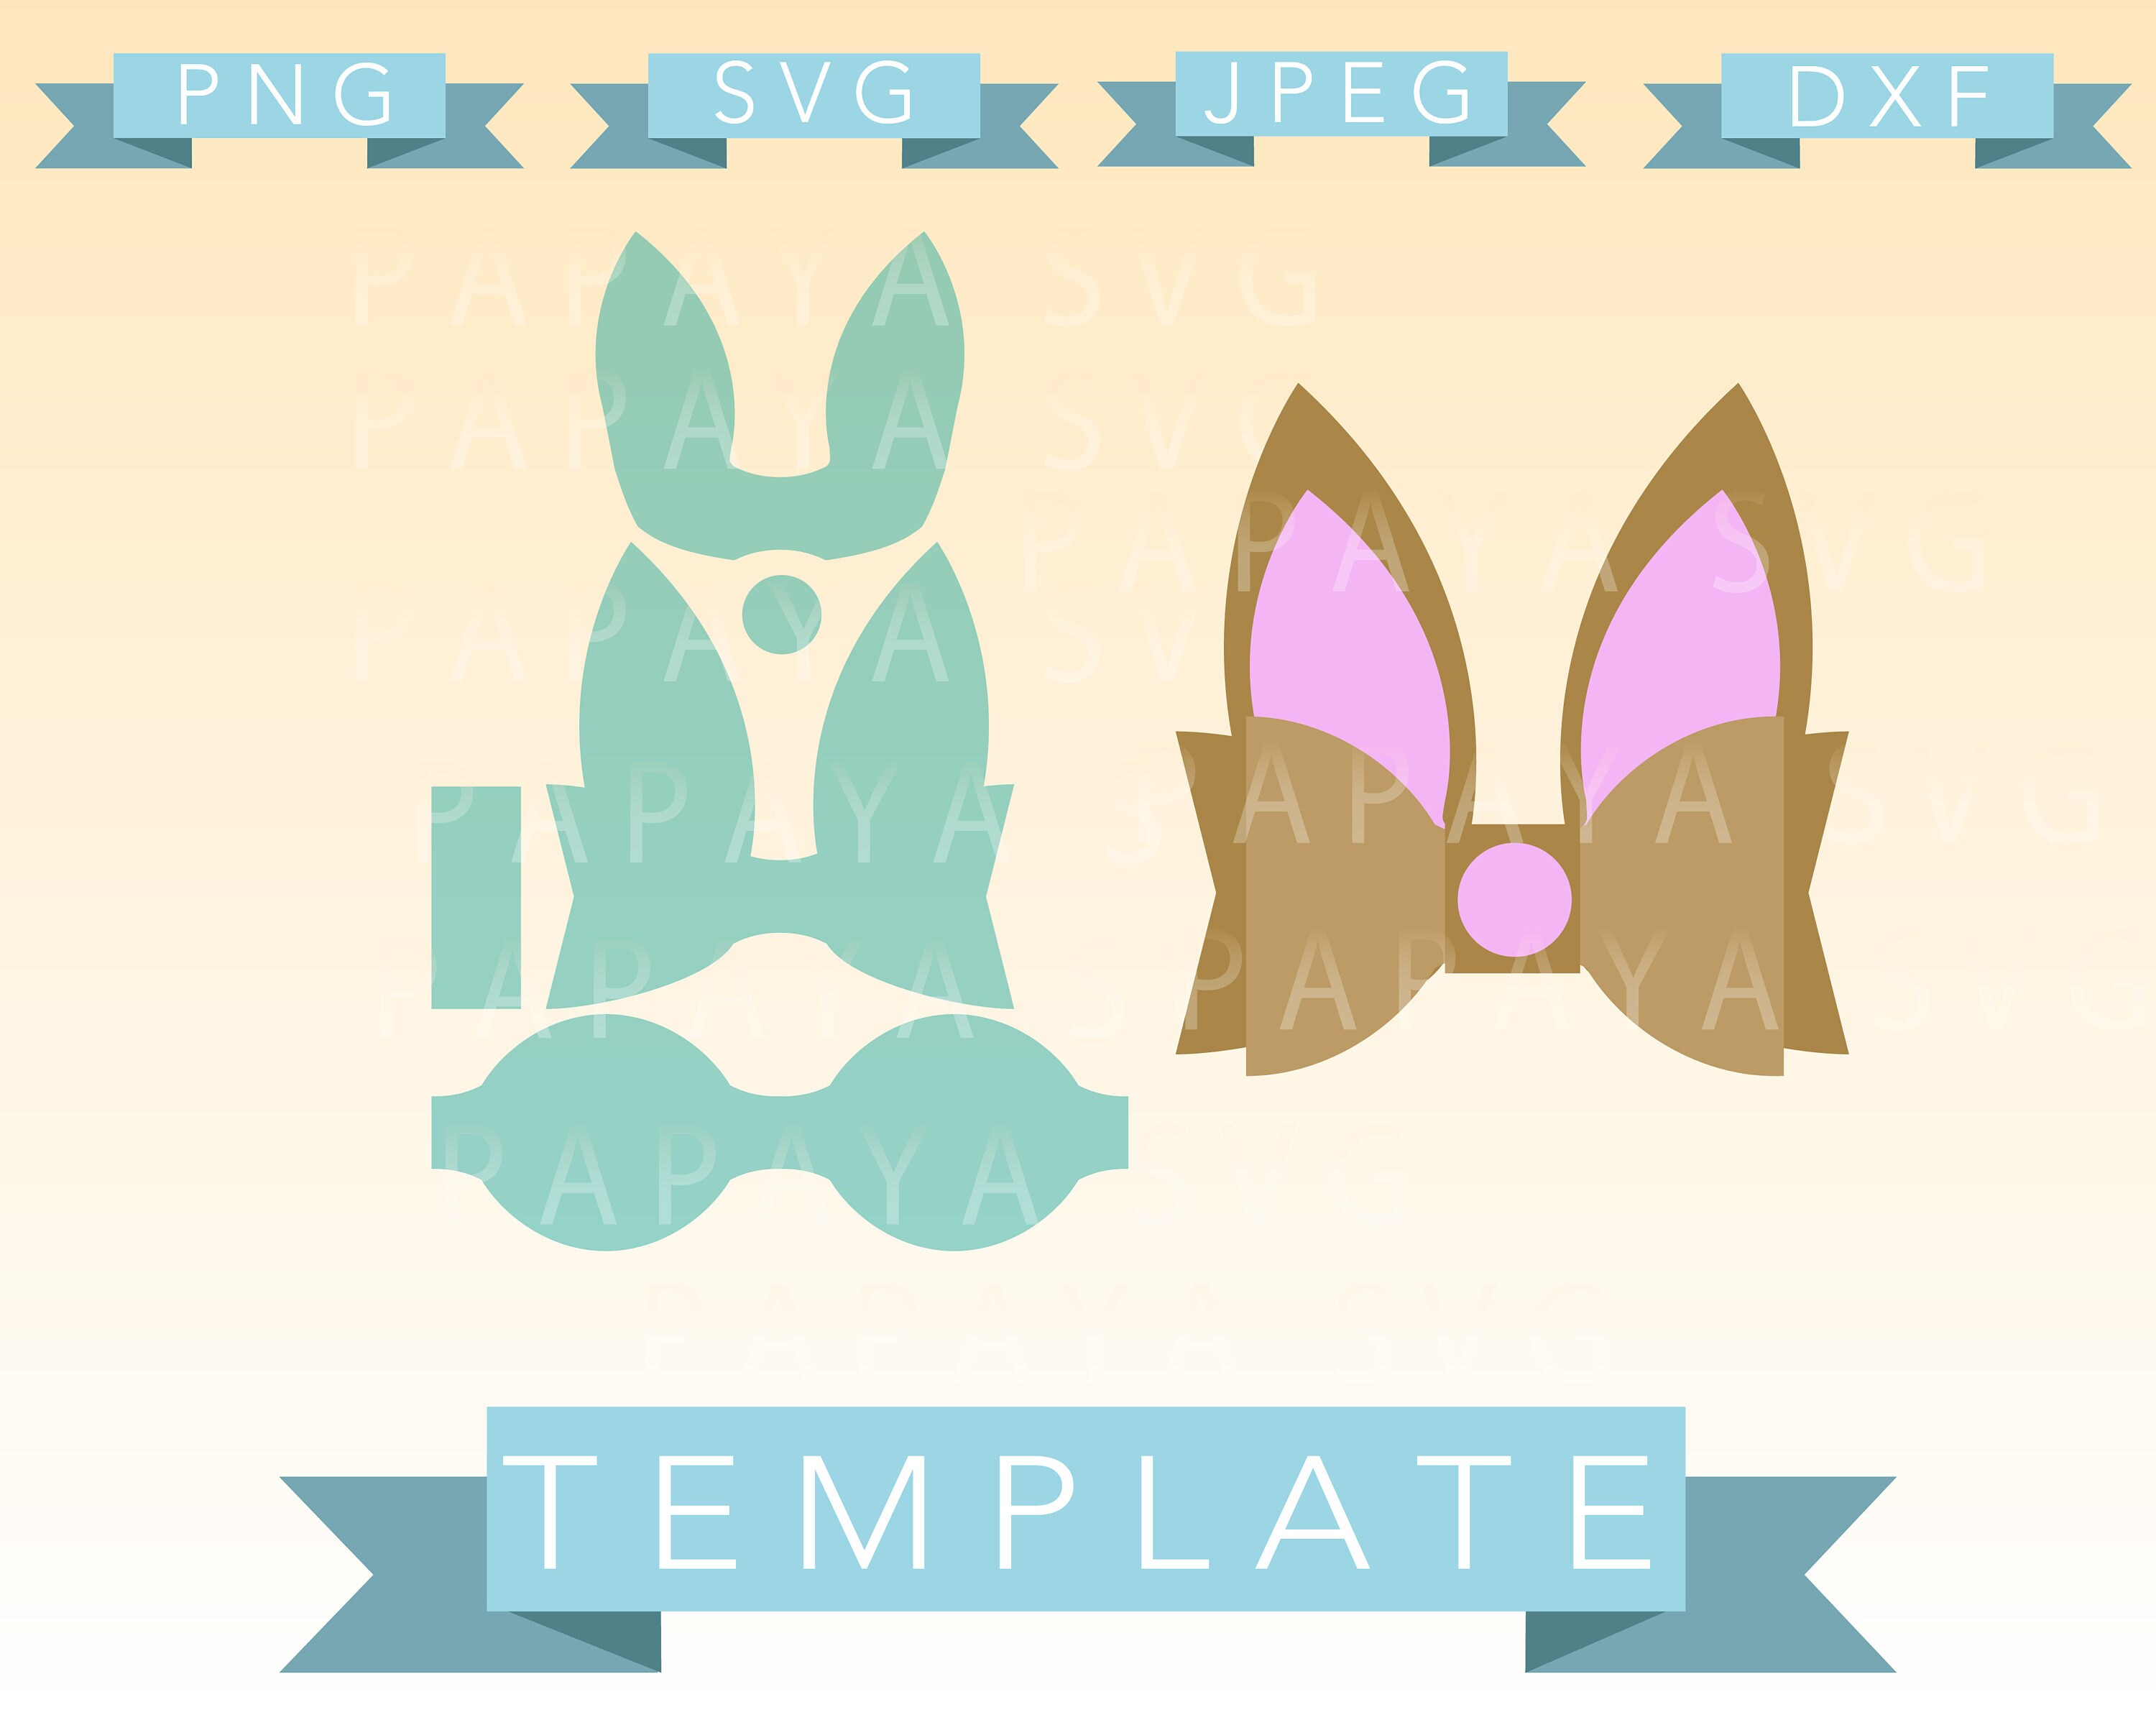 Download Diy Easter Bow Template Cut File - SVG, PNG, JPEG, dxf ...